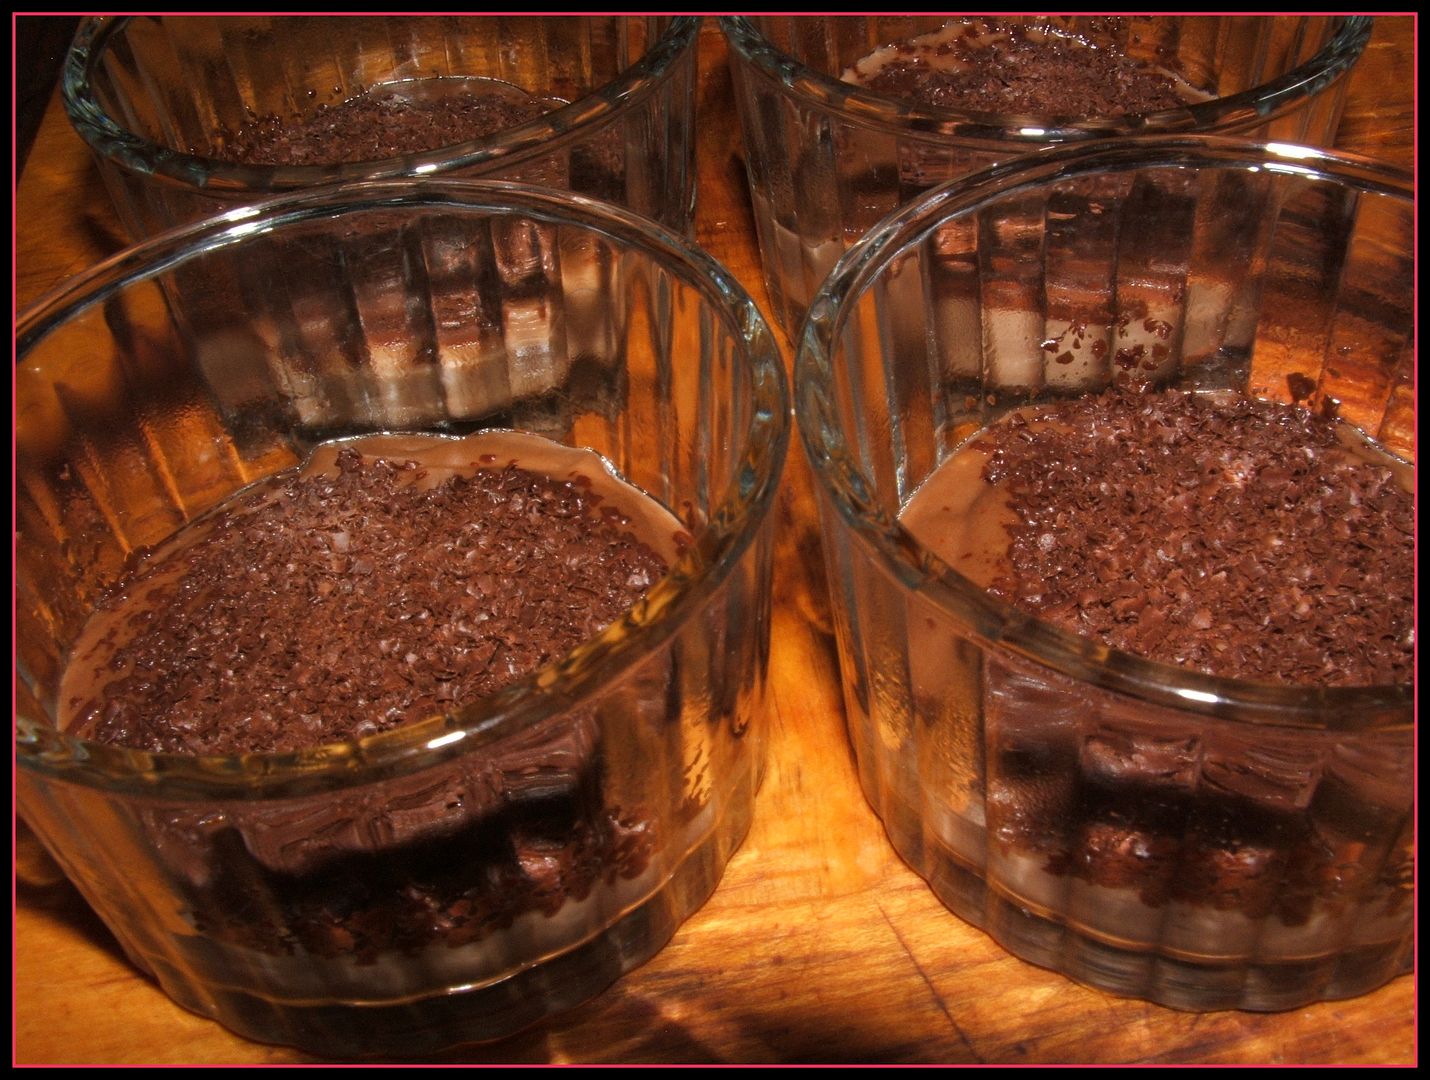 Chili Pepper Chocolate Creme Brulee by Angie Ouellette-Tower photo 003_zpse183e6e0.jpg